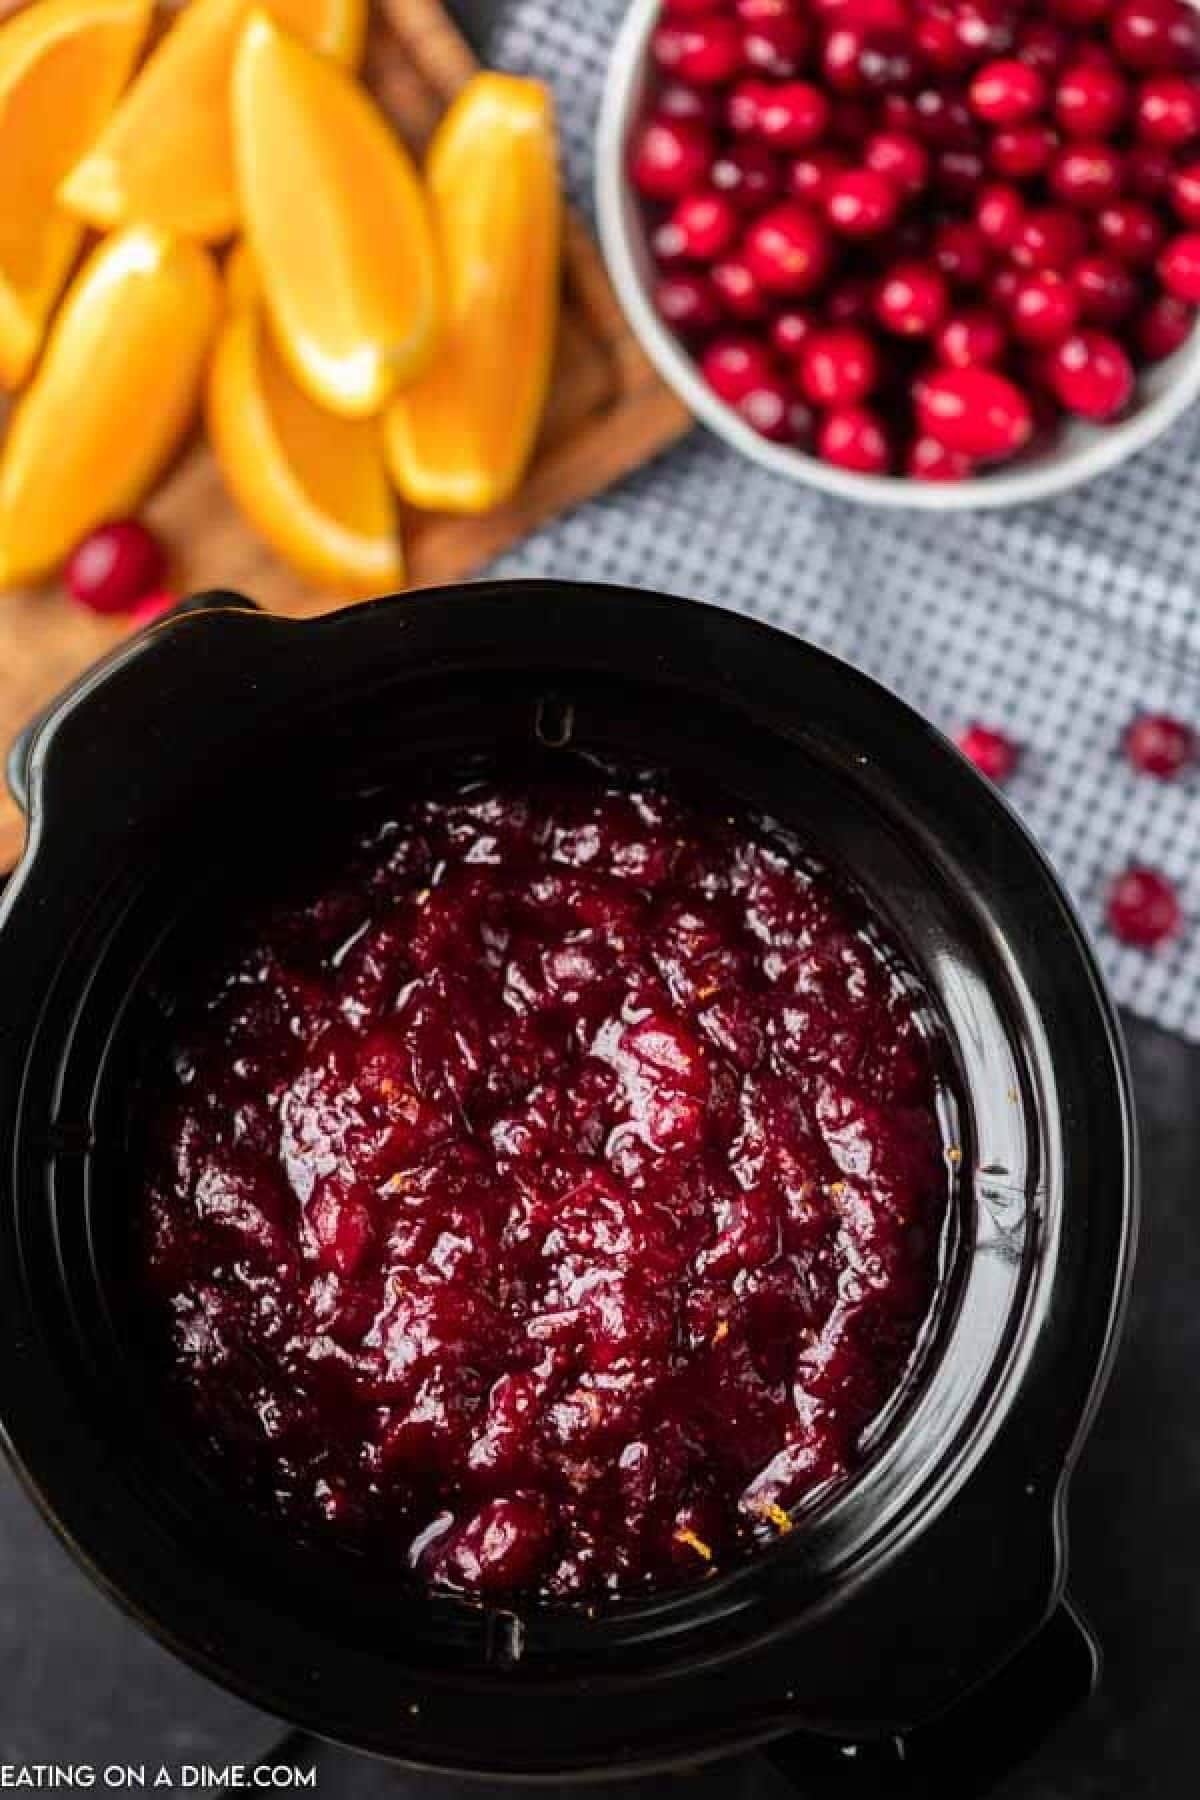 Cranberry sauce cooked on a slow cooker.